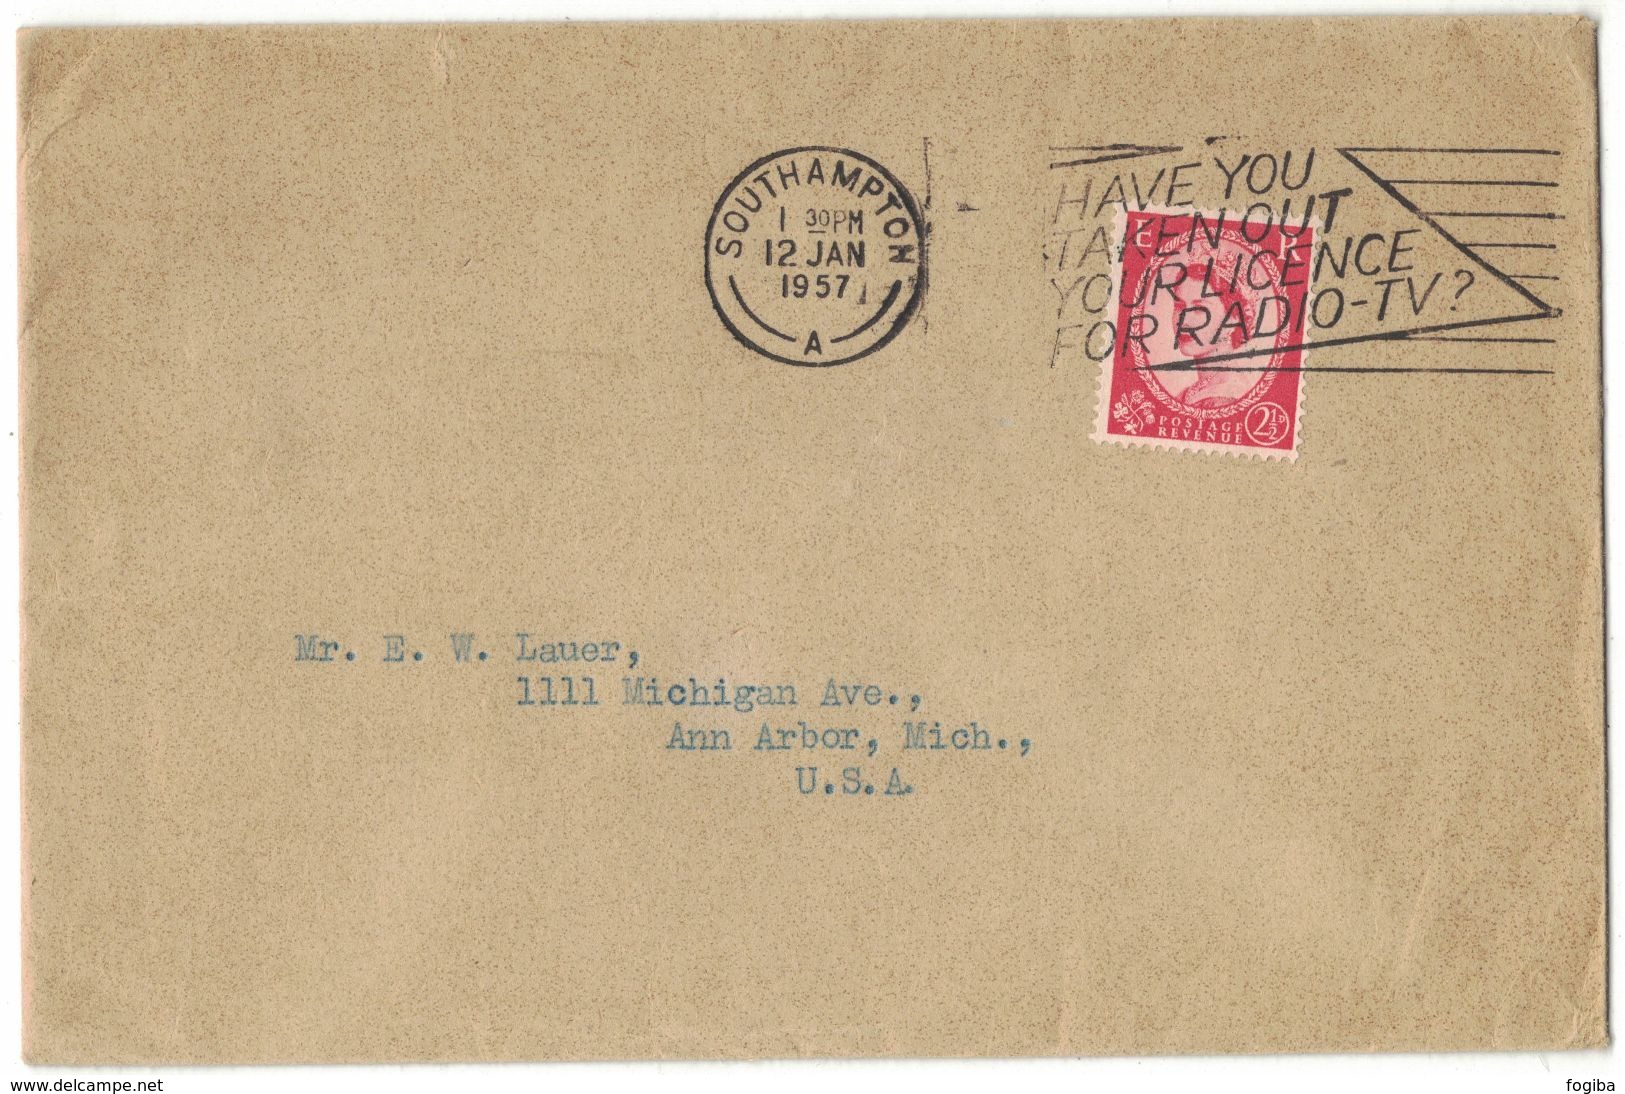 VE137 Great Britain Southampton 1957 Cover  To USA With Special Postmark "Have You Taken Out Your Licence For Radio-TV" - Storia Postale